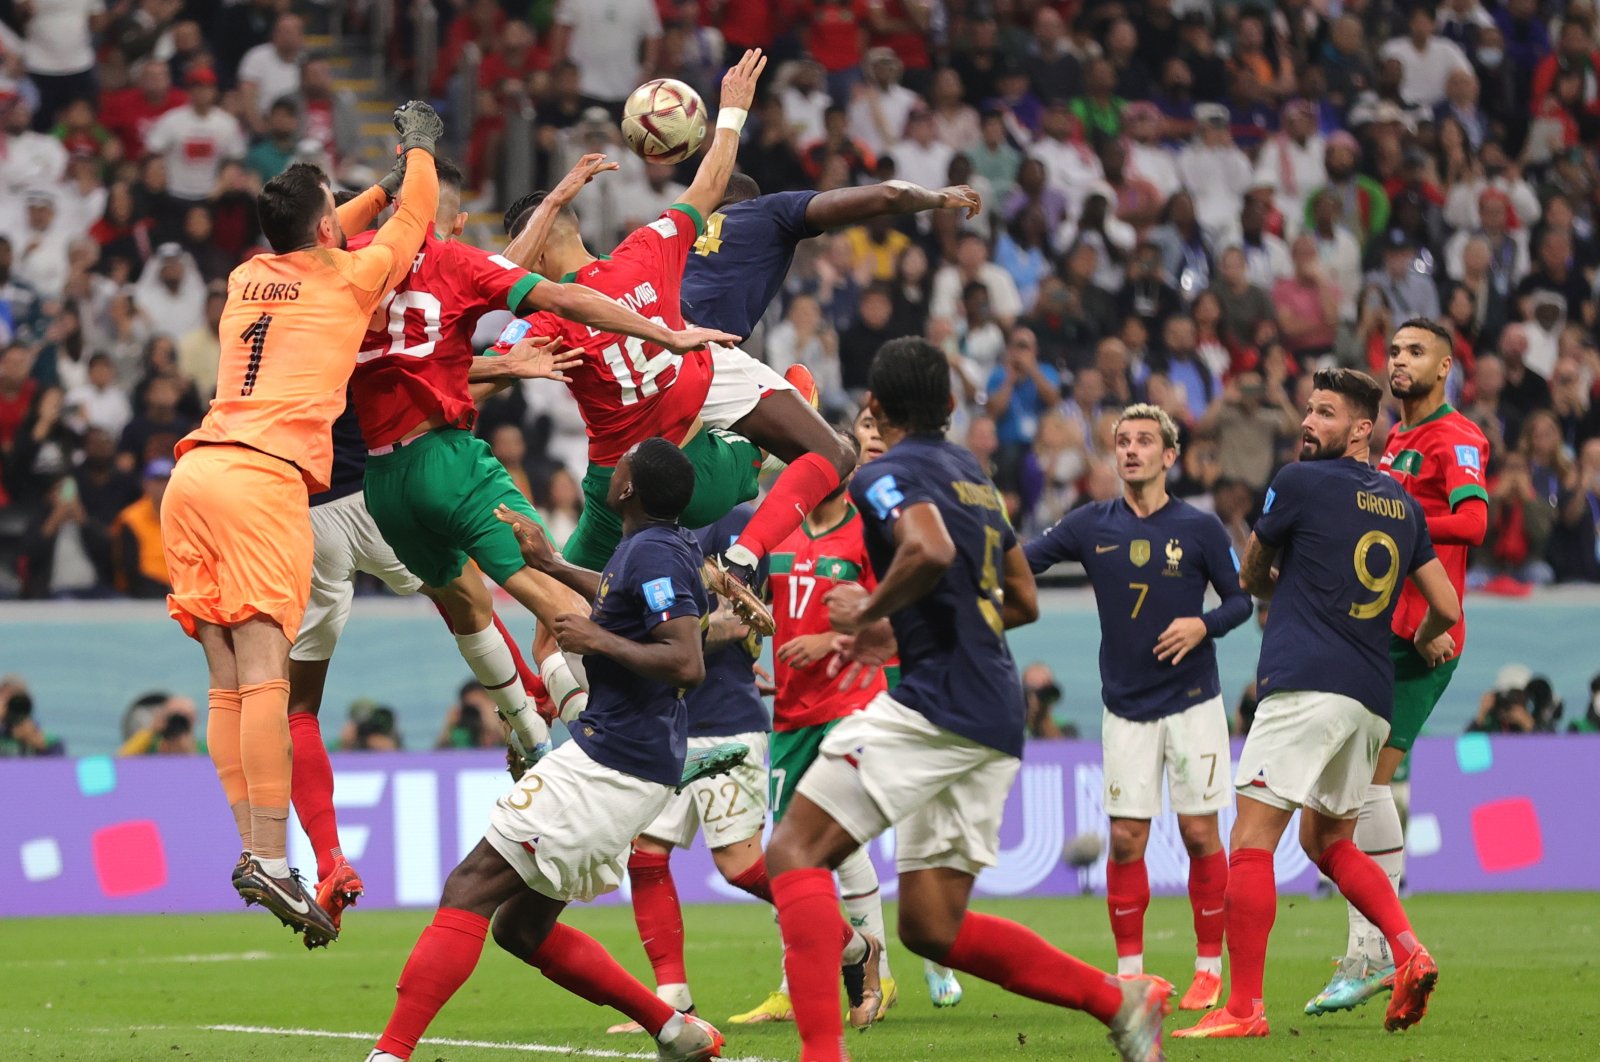 Goalkeeper Hugo Lloris (L) of France reaches for the ball during the FIFA World Cup 2022 semi-final between France and Morocco at Al Bayt Stadium in Al Khor, Qatar, Dec. 14, 2022.  (EPA Photo)